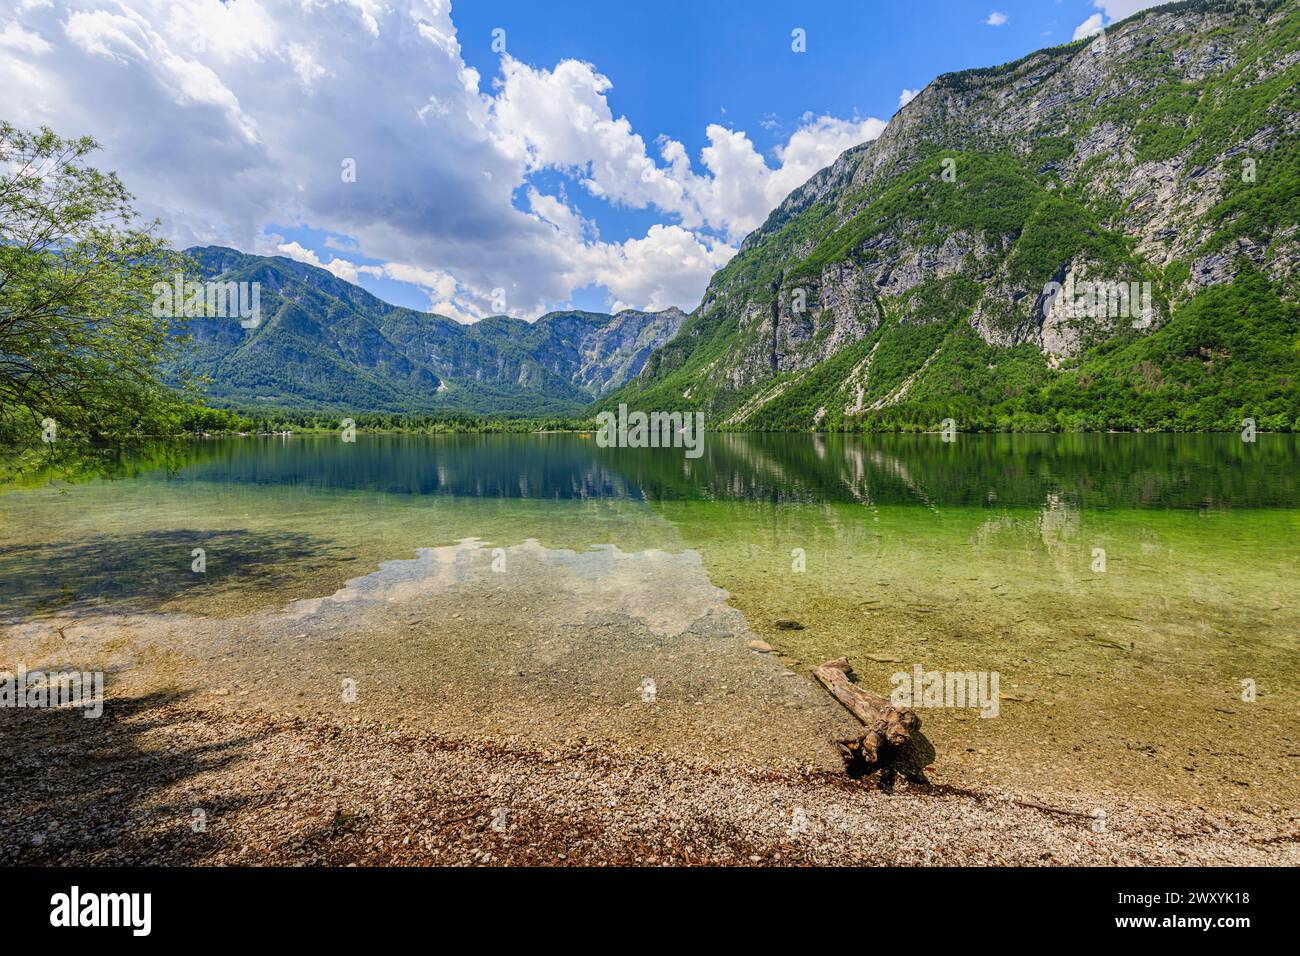 Panoramic view of the shoreline, clear waters and mountains around Lake Bohinj, a popular tourist destination in Slovenia, central & eastern Europe Stock Photo